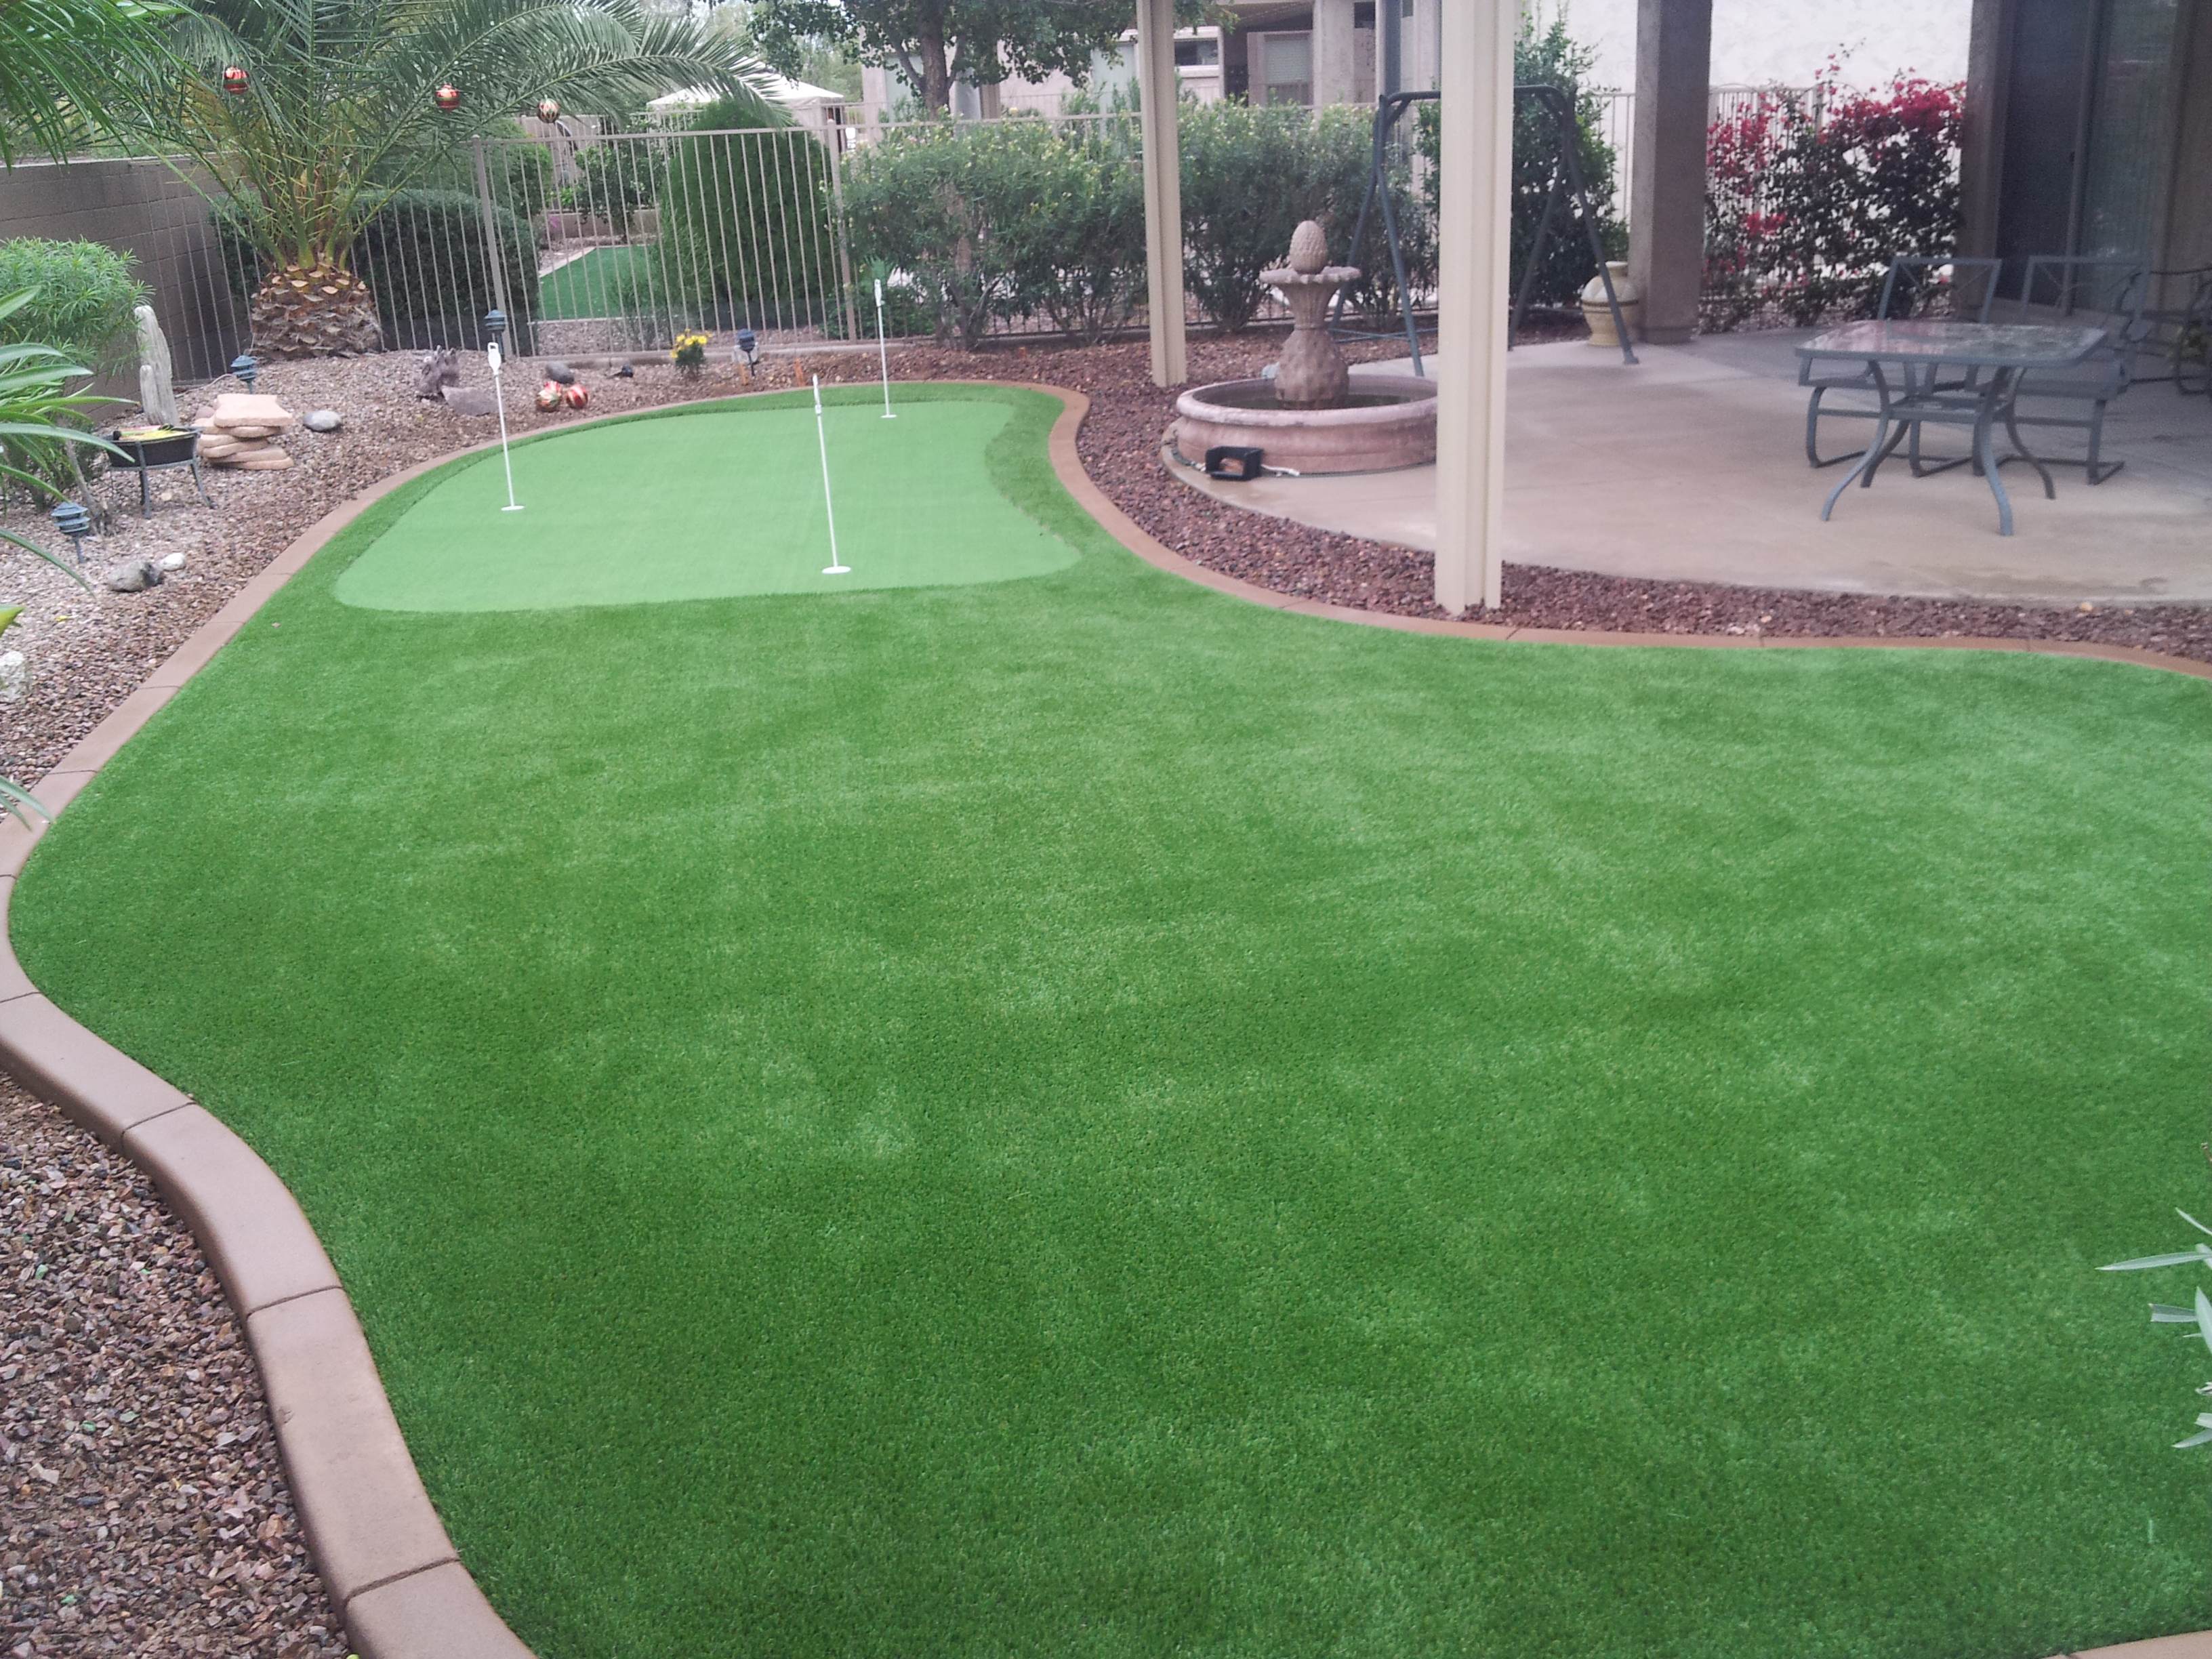 Get Your Backyard Putting Green Today!